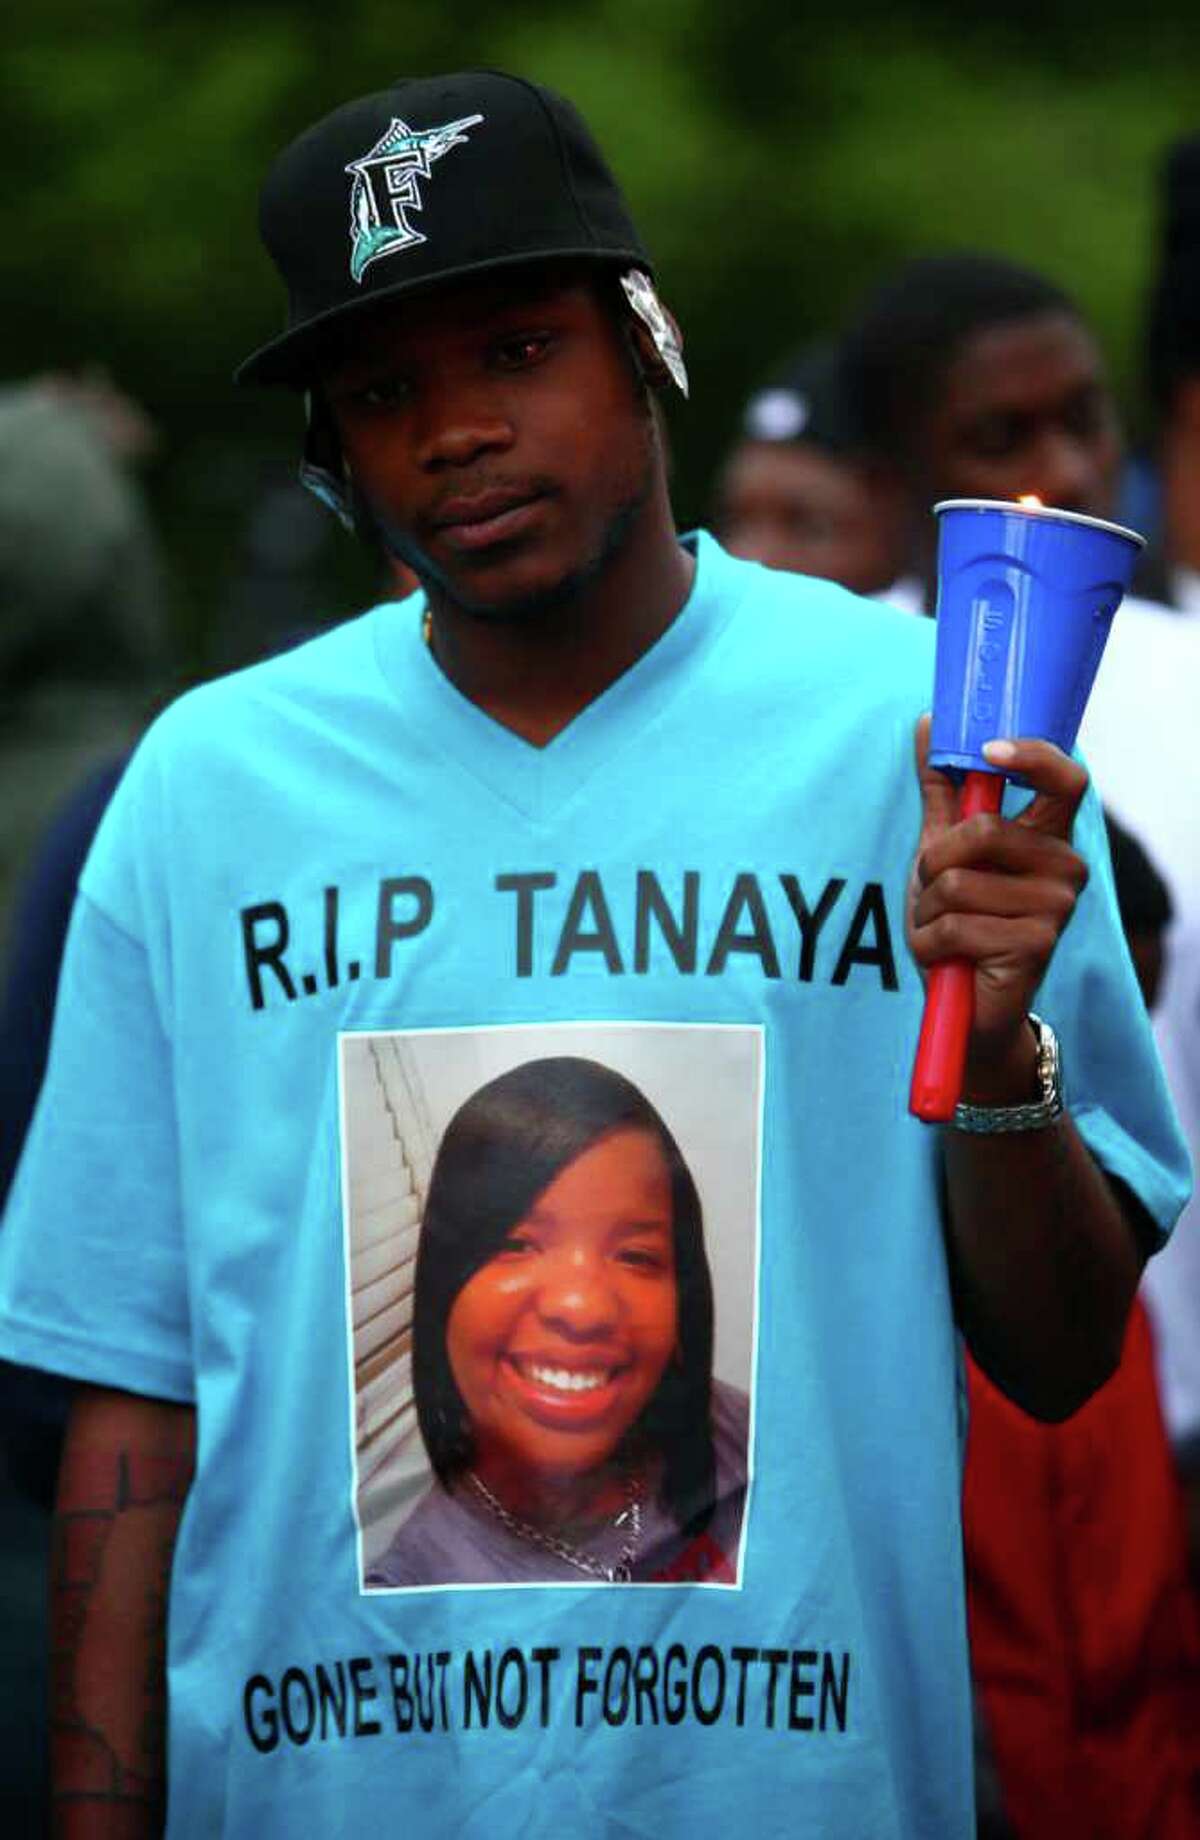 Aufu Snow wears a shirt memorializing Tanaya Gilbert, a 19 year-old woman shot and killed in South Seattle. A vigil was held for the woman, who was pregnant, on Thursday, July 14, 2011 on 54th Avenue South, site of the shooting. More shots were fired as the vigil was winding down. Police said someone fired on a blue and silver Dodge Magnum with chrome wheels. The car sped off after the shooting.